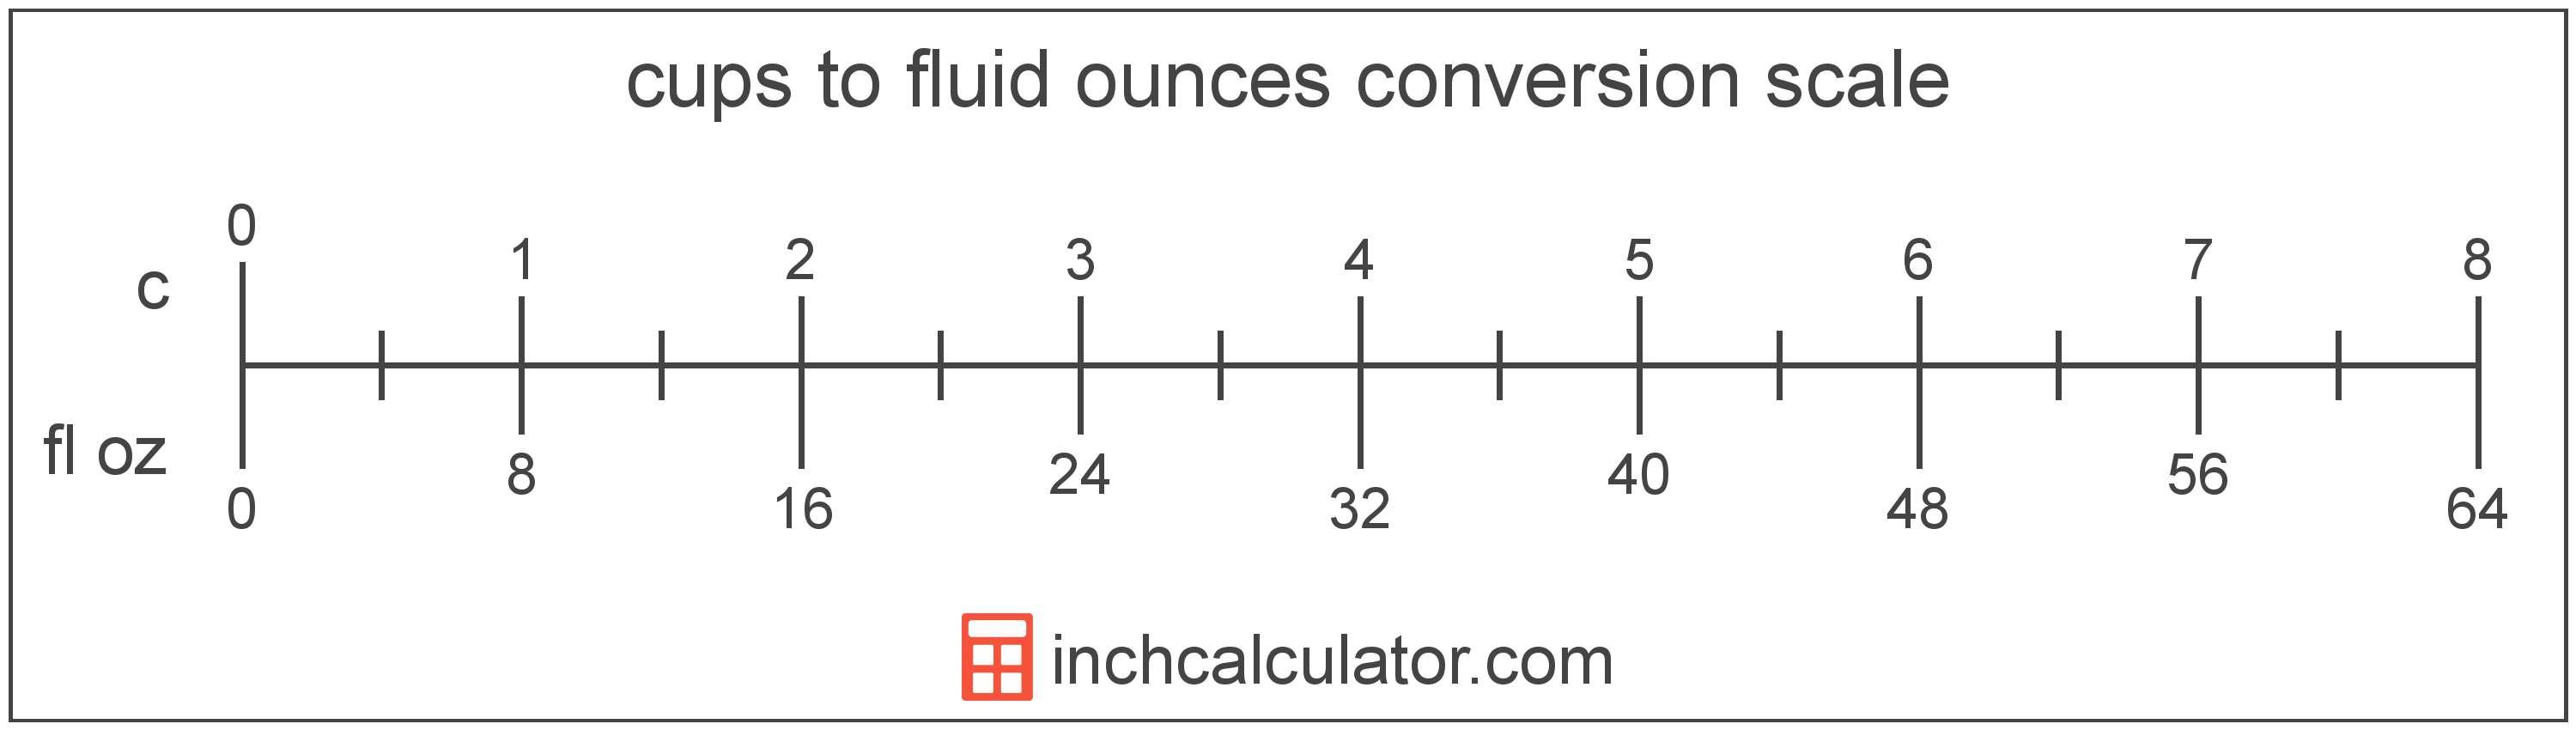 conversion scale showing fluid ounces and equivalent cups volume values